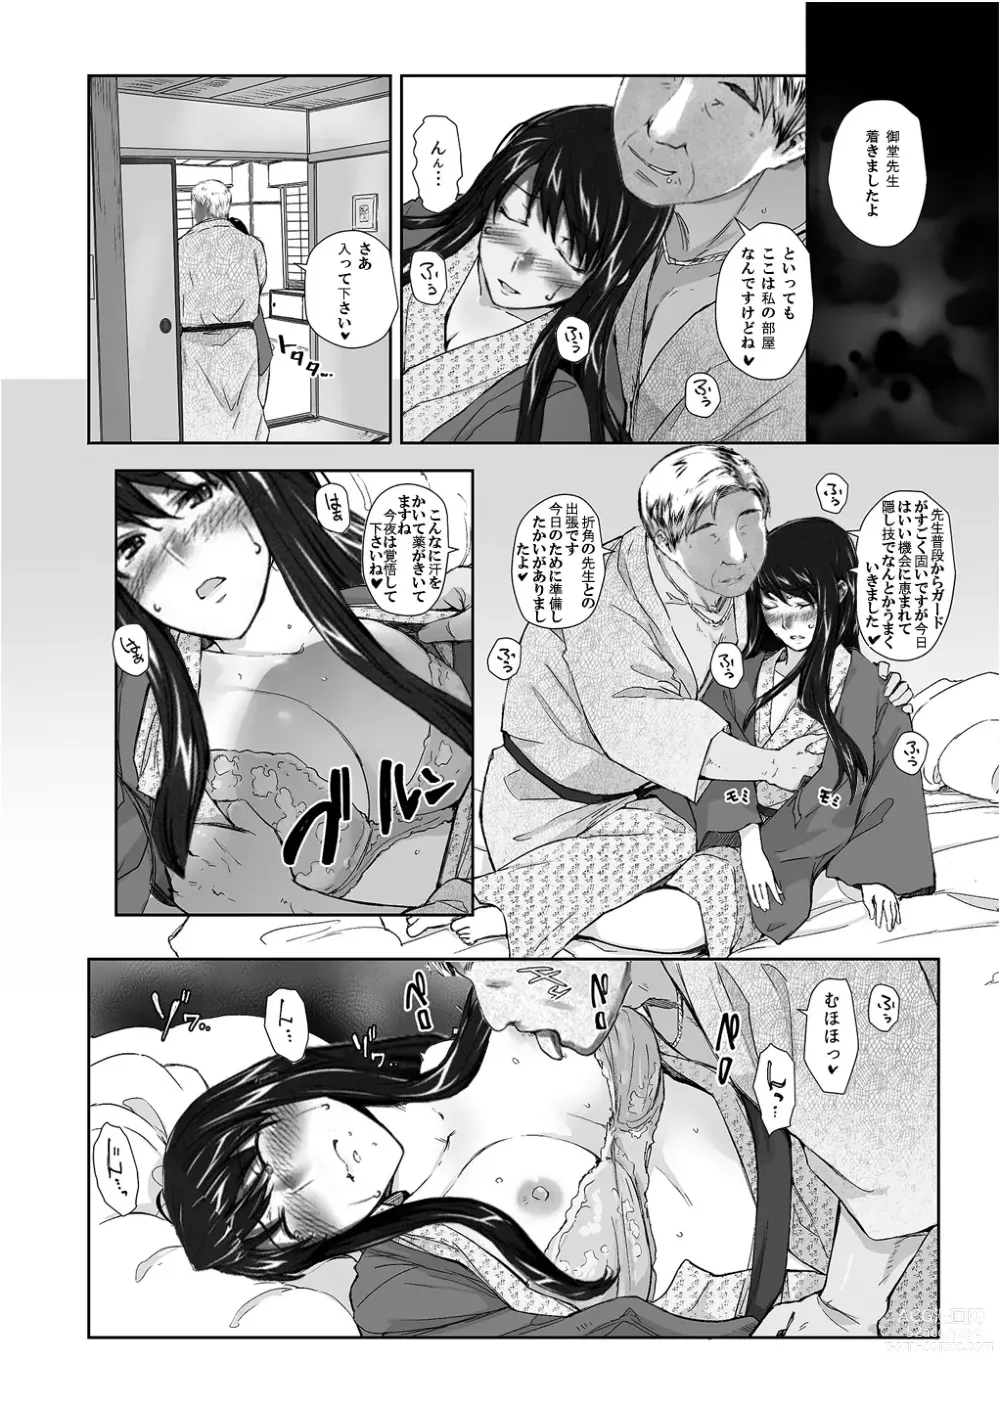 Page 6 of doujinshi Sakiko-san in delusion Vol.8 revised ~Sakiko-sans circumstance at an educational training Route3~ (collage) (Continue to “First day of study trip” (page 42) of Vol.1)